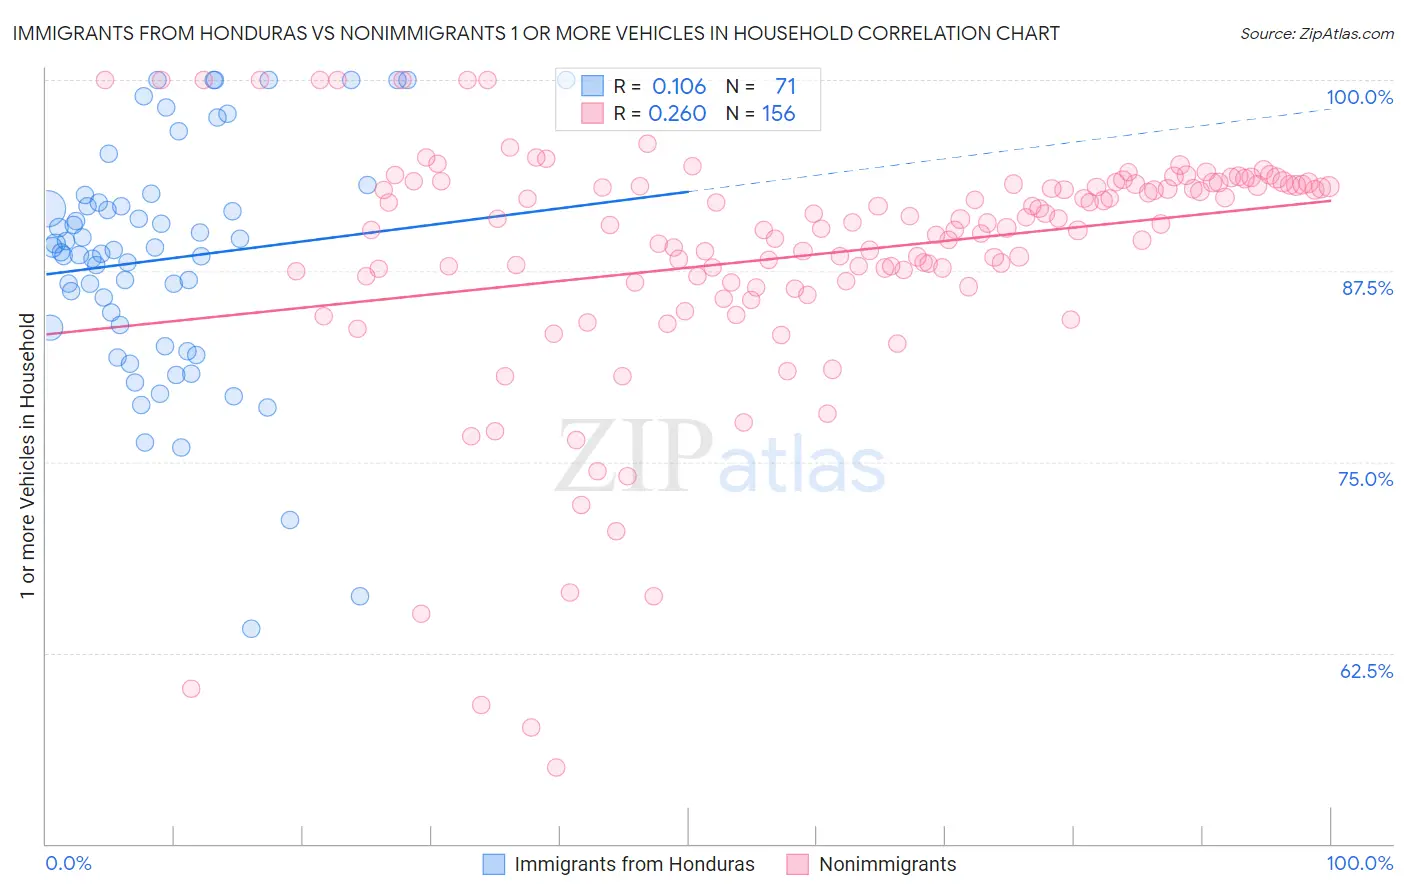 Immigrants from Honduras vs Nonimmigrants 1 or more Vehicles in Household